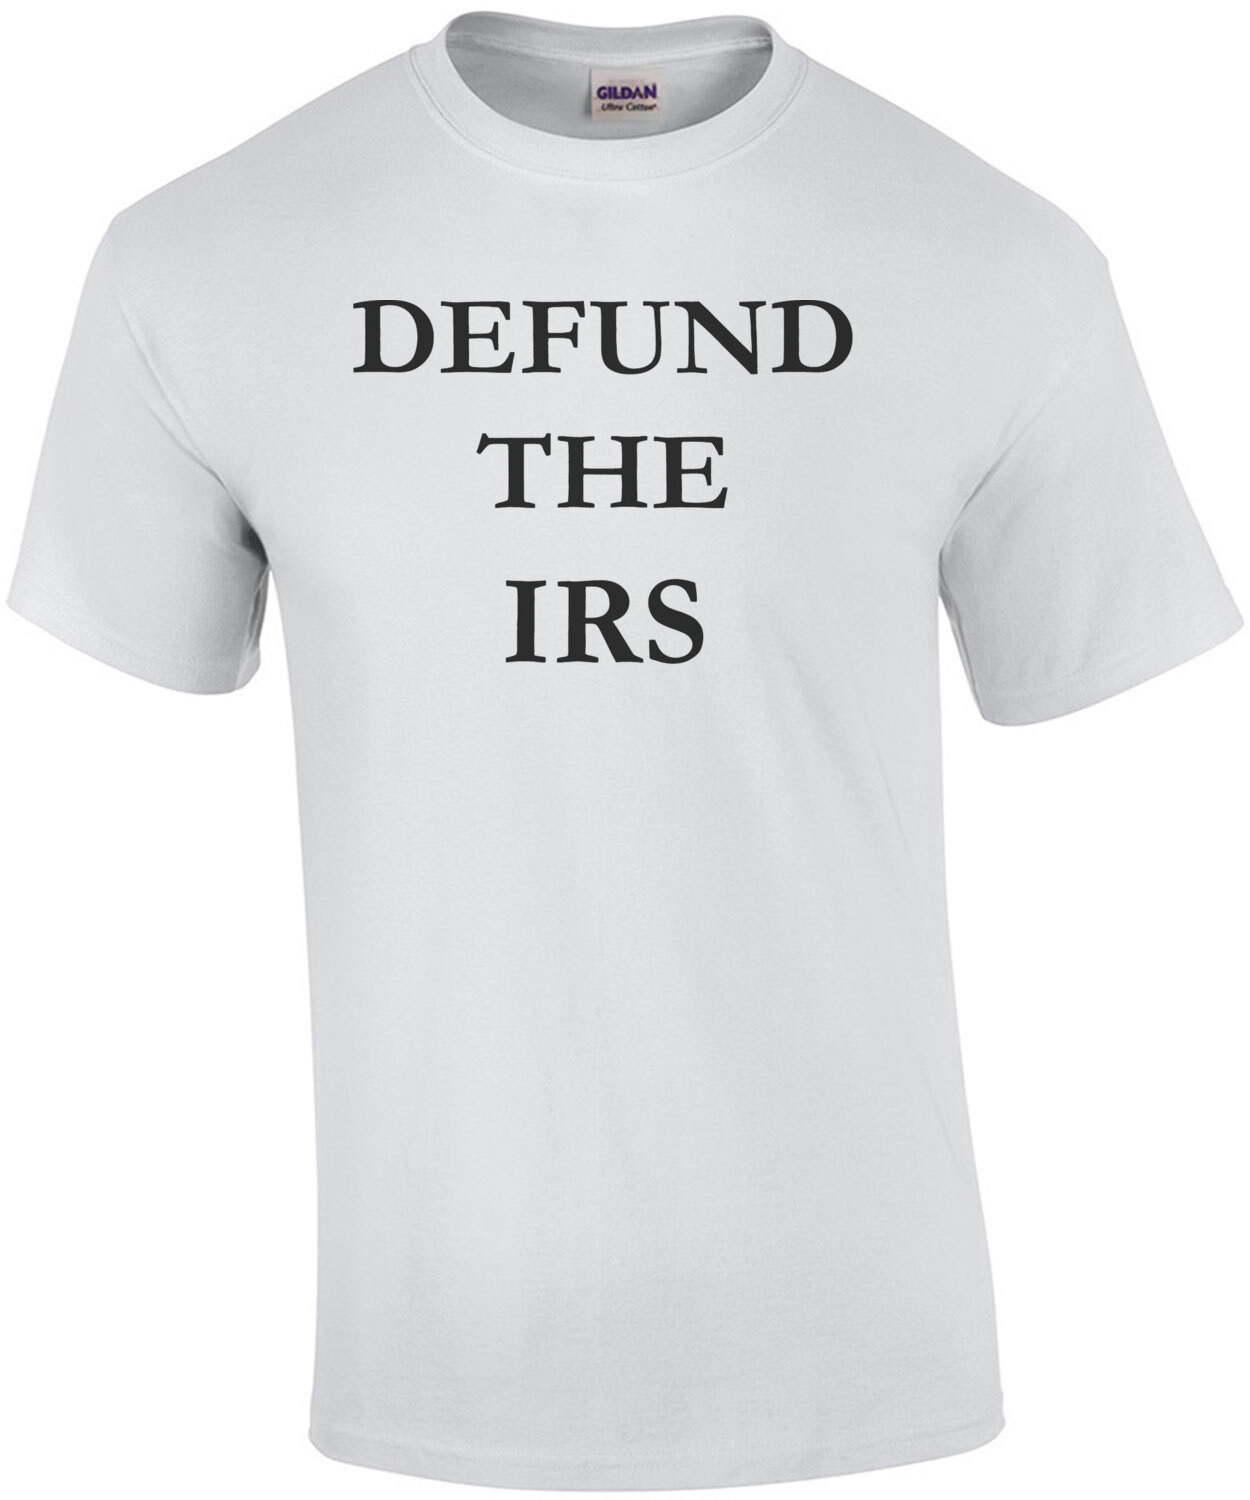 Defund the IRS - Political Shirt